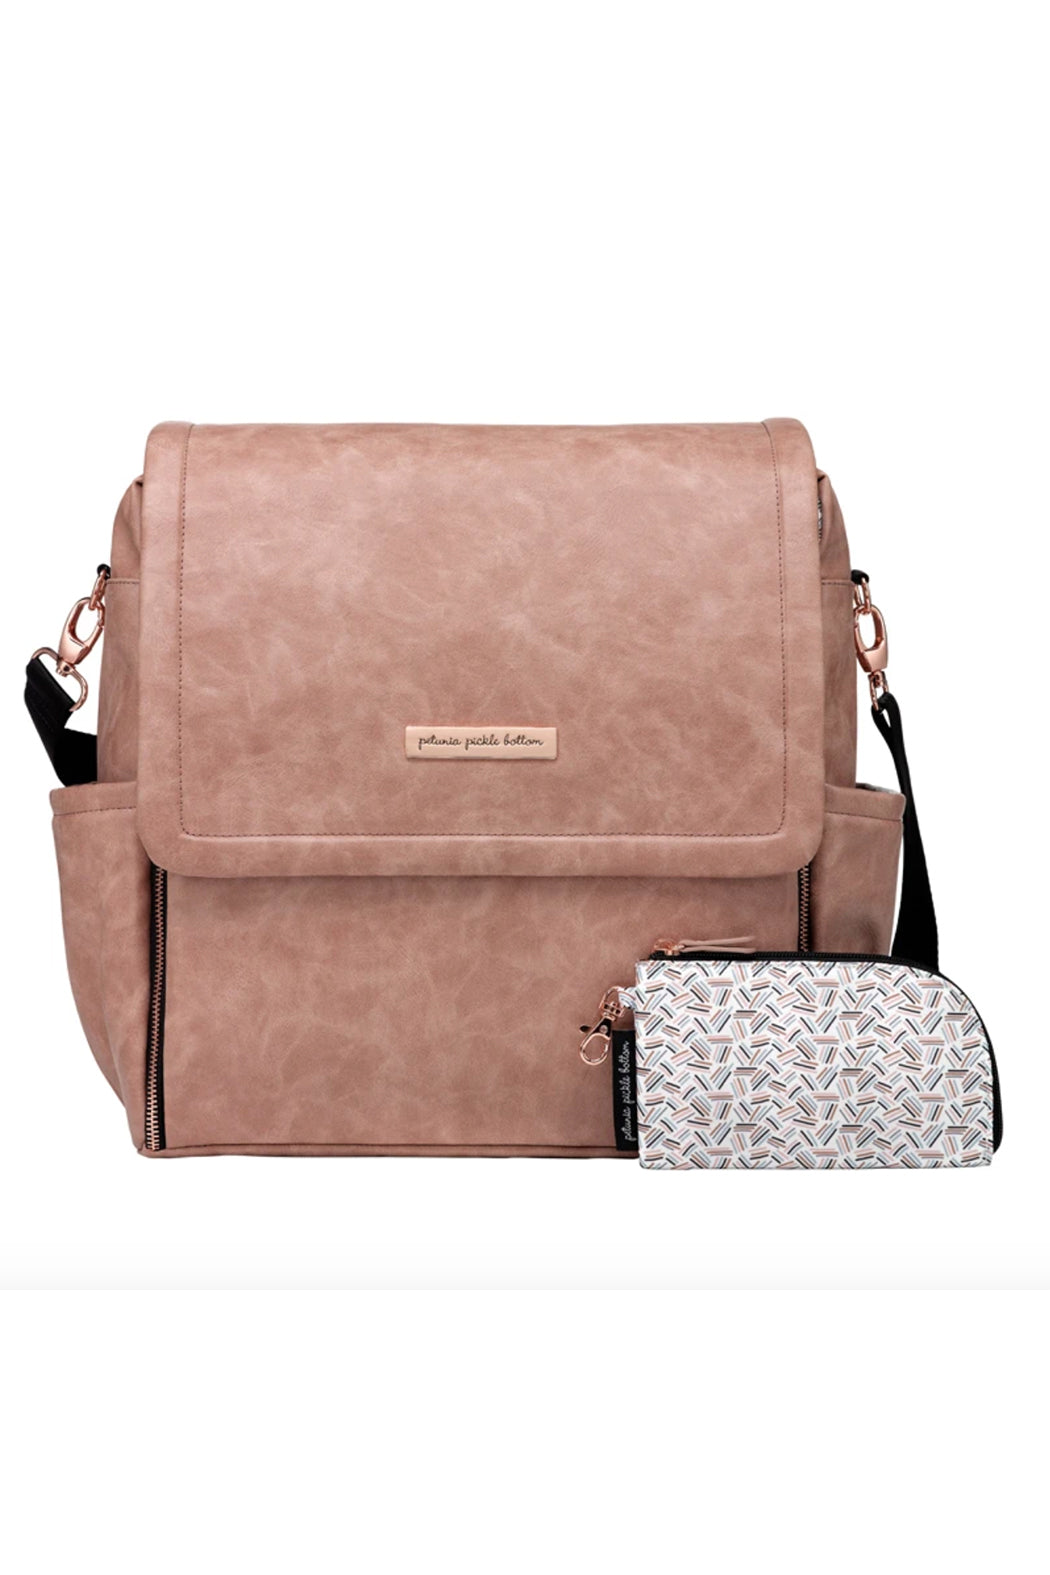 Pentunia Picklebottom Boxy Backpack - Dusy Rose Leatherette